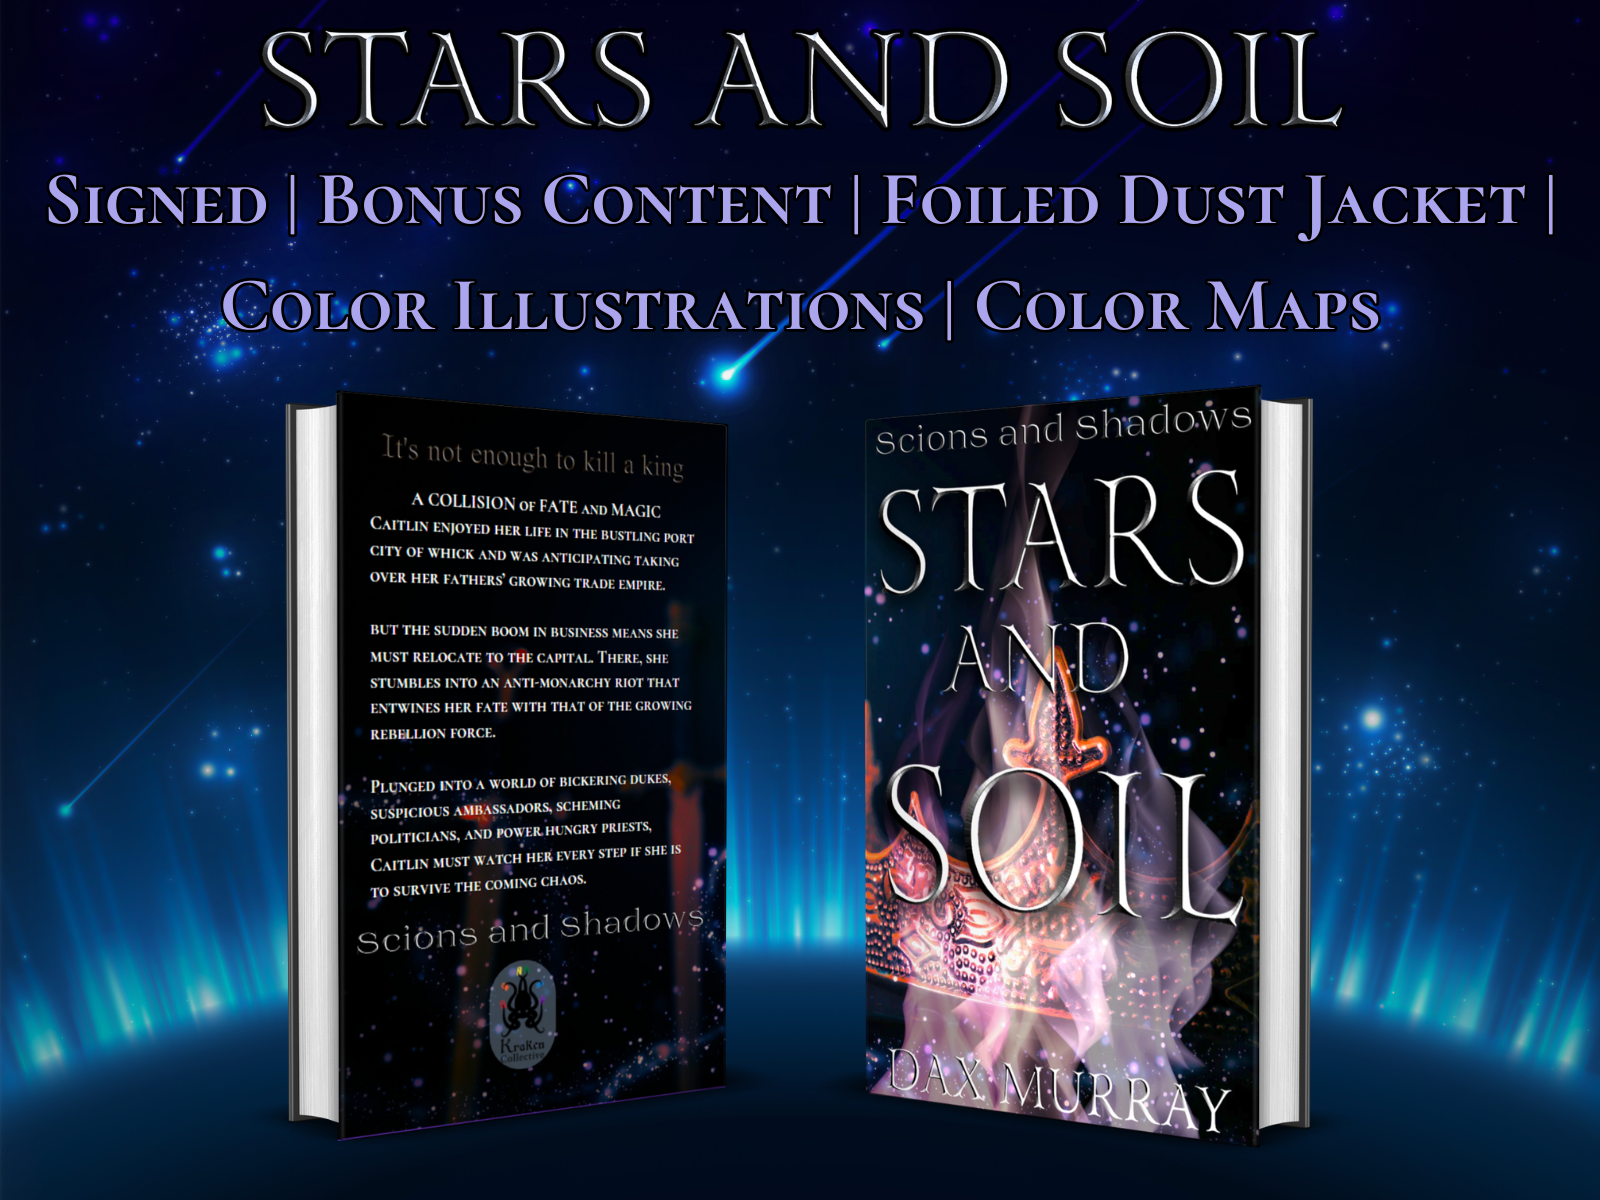 STARS AND SOIL. Signed | Bonus Content | Foiled Dust Jacket | Color Illustrations | Maps. Front and back of the book displayed. Front shows a crown on fire with the title overlayed. Back shows two swords with the book blurb displayed.